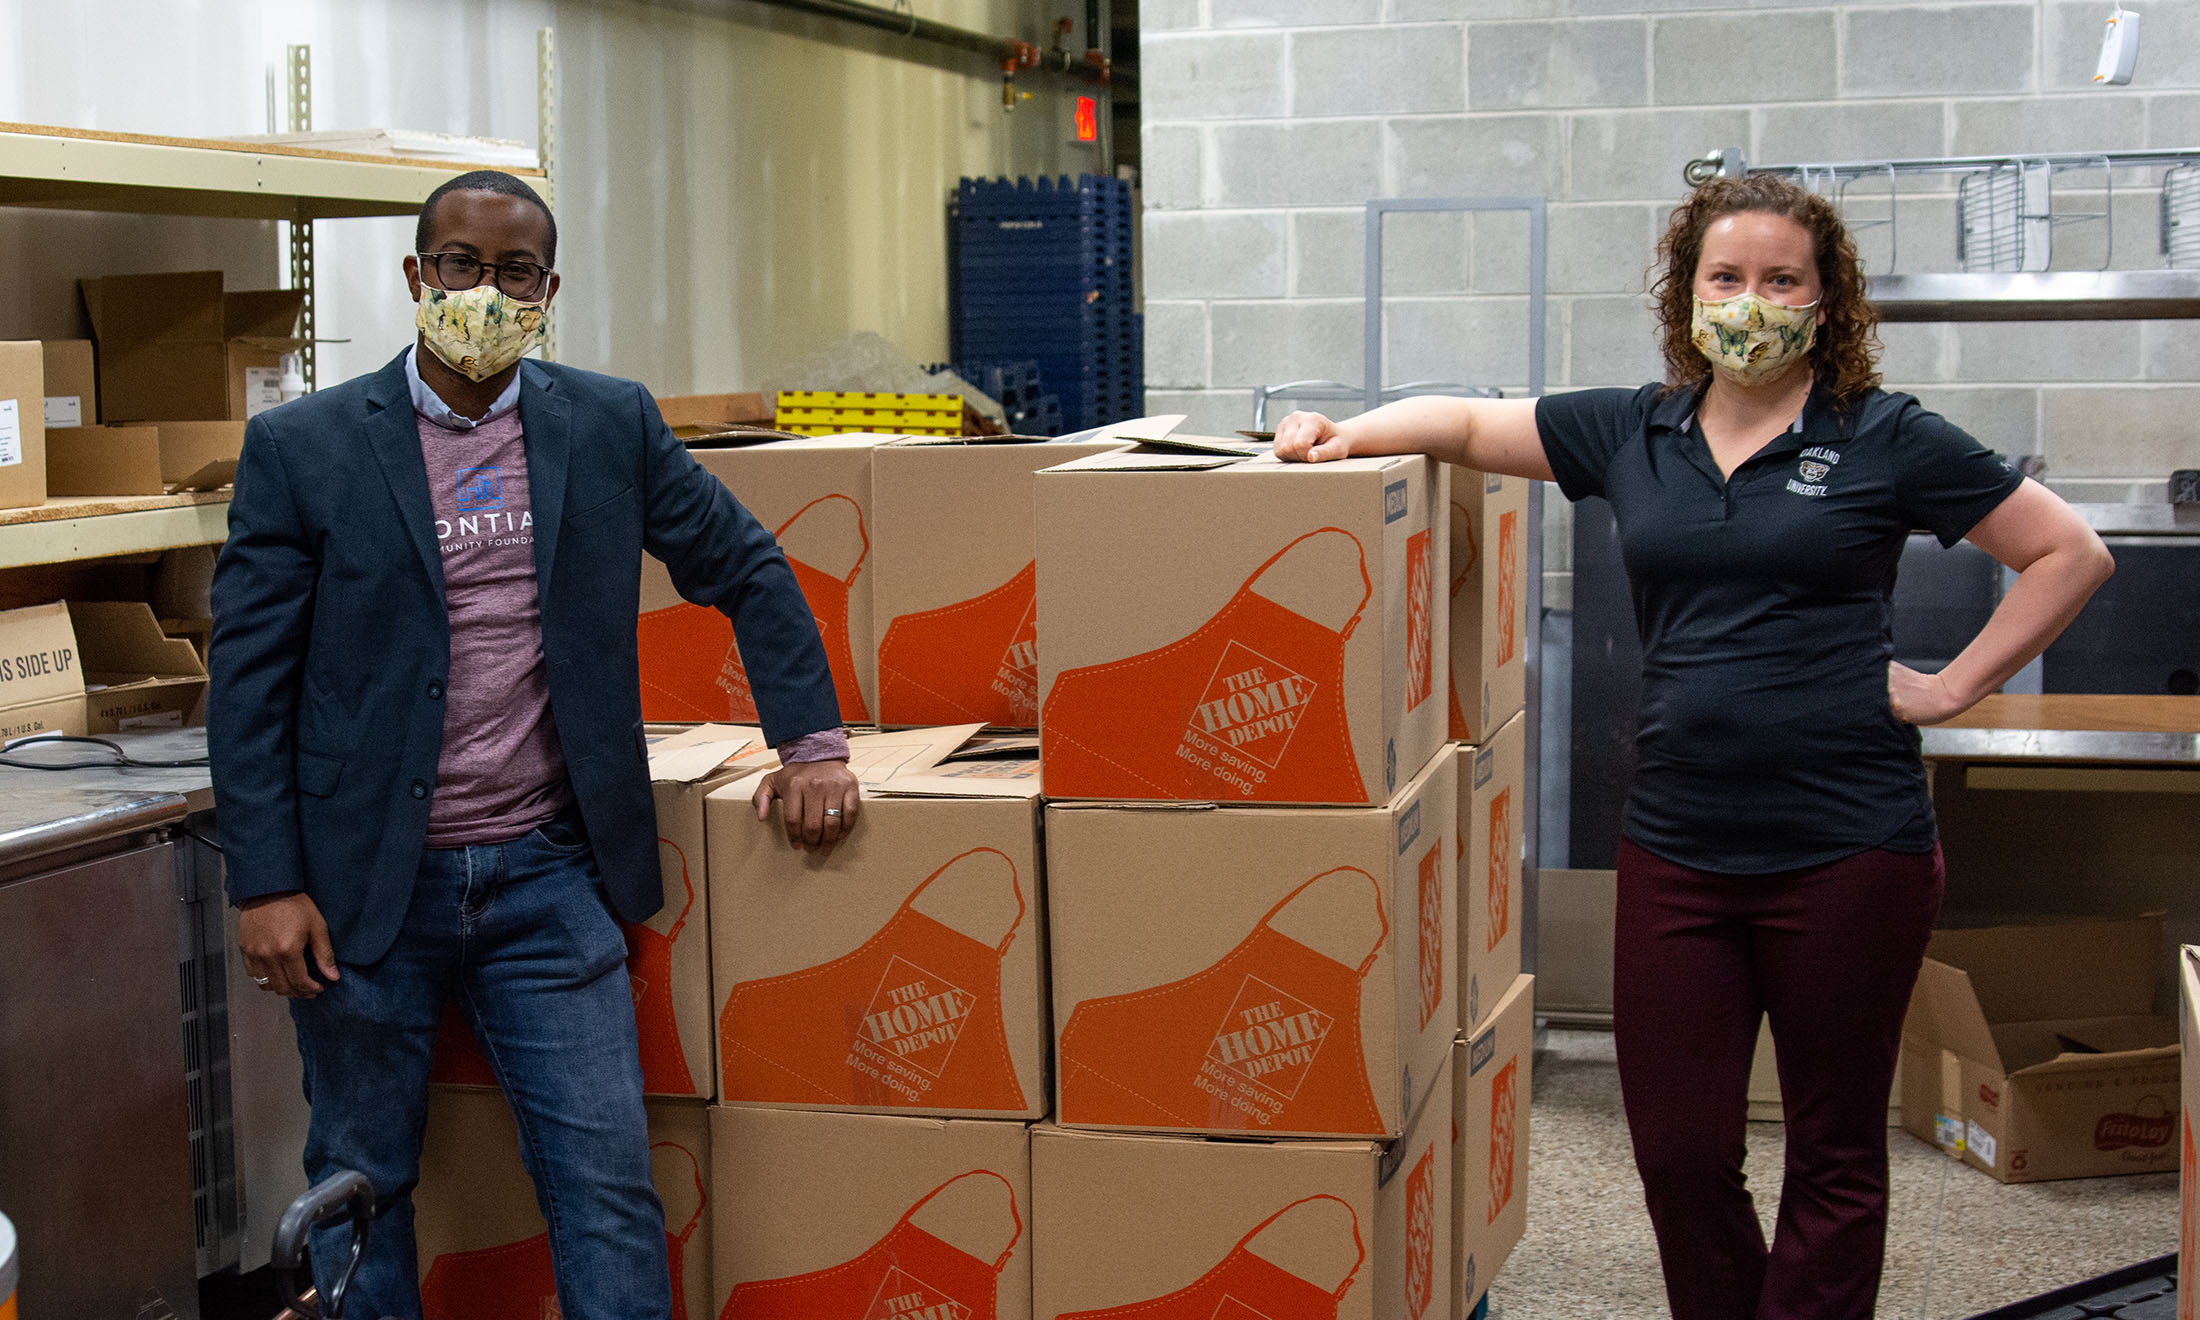 Two Oakland University employees standing next to boxes with masks on